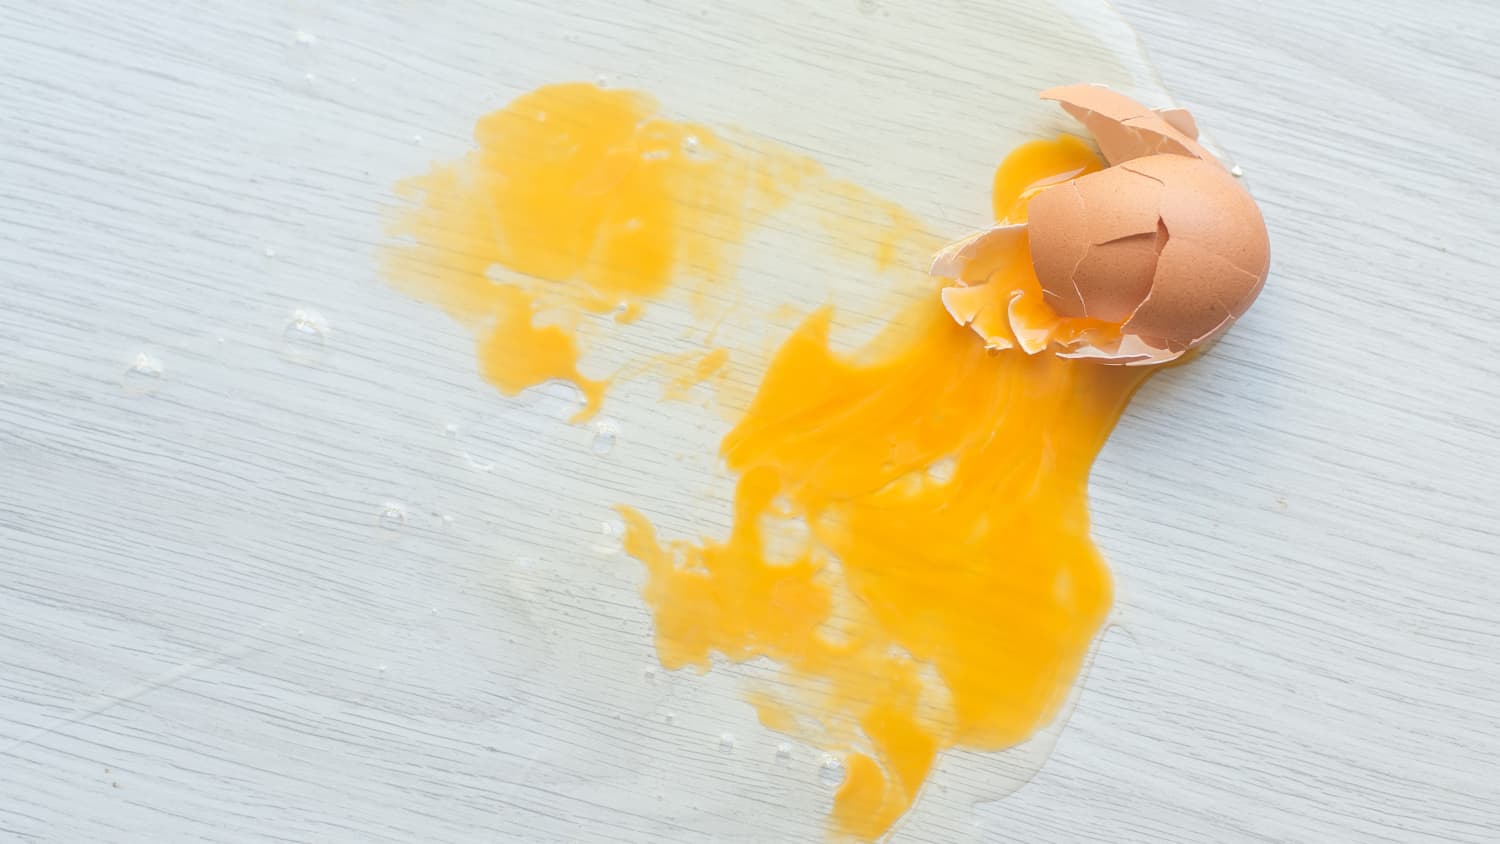 How to remove egg from your carpet